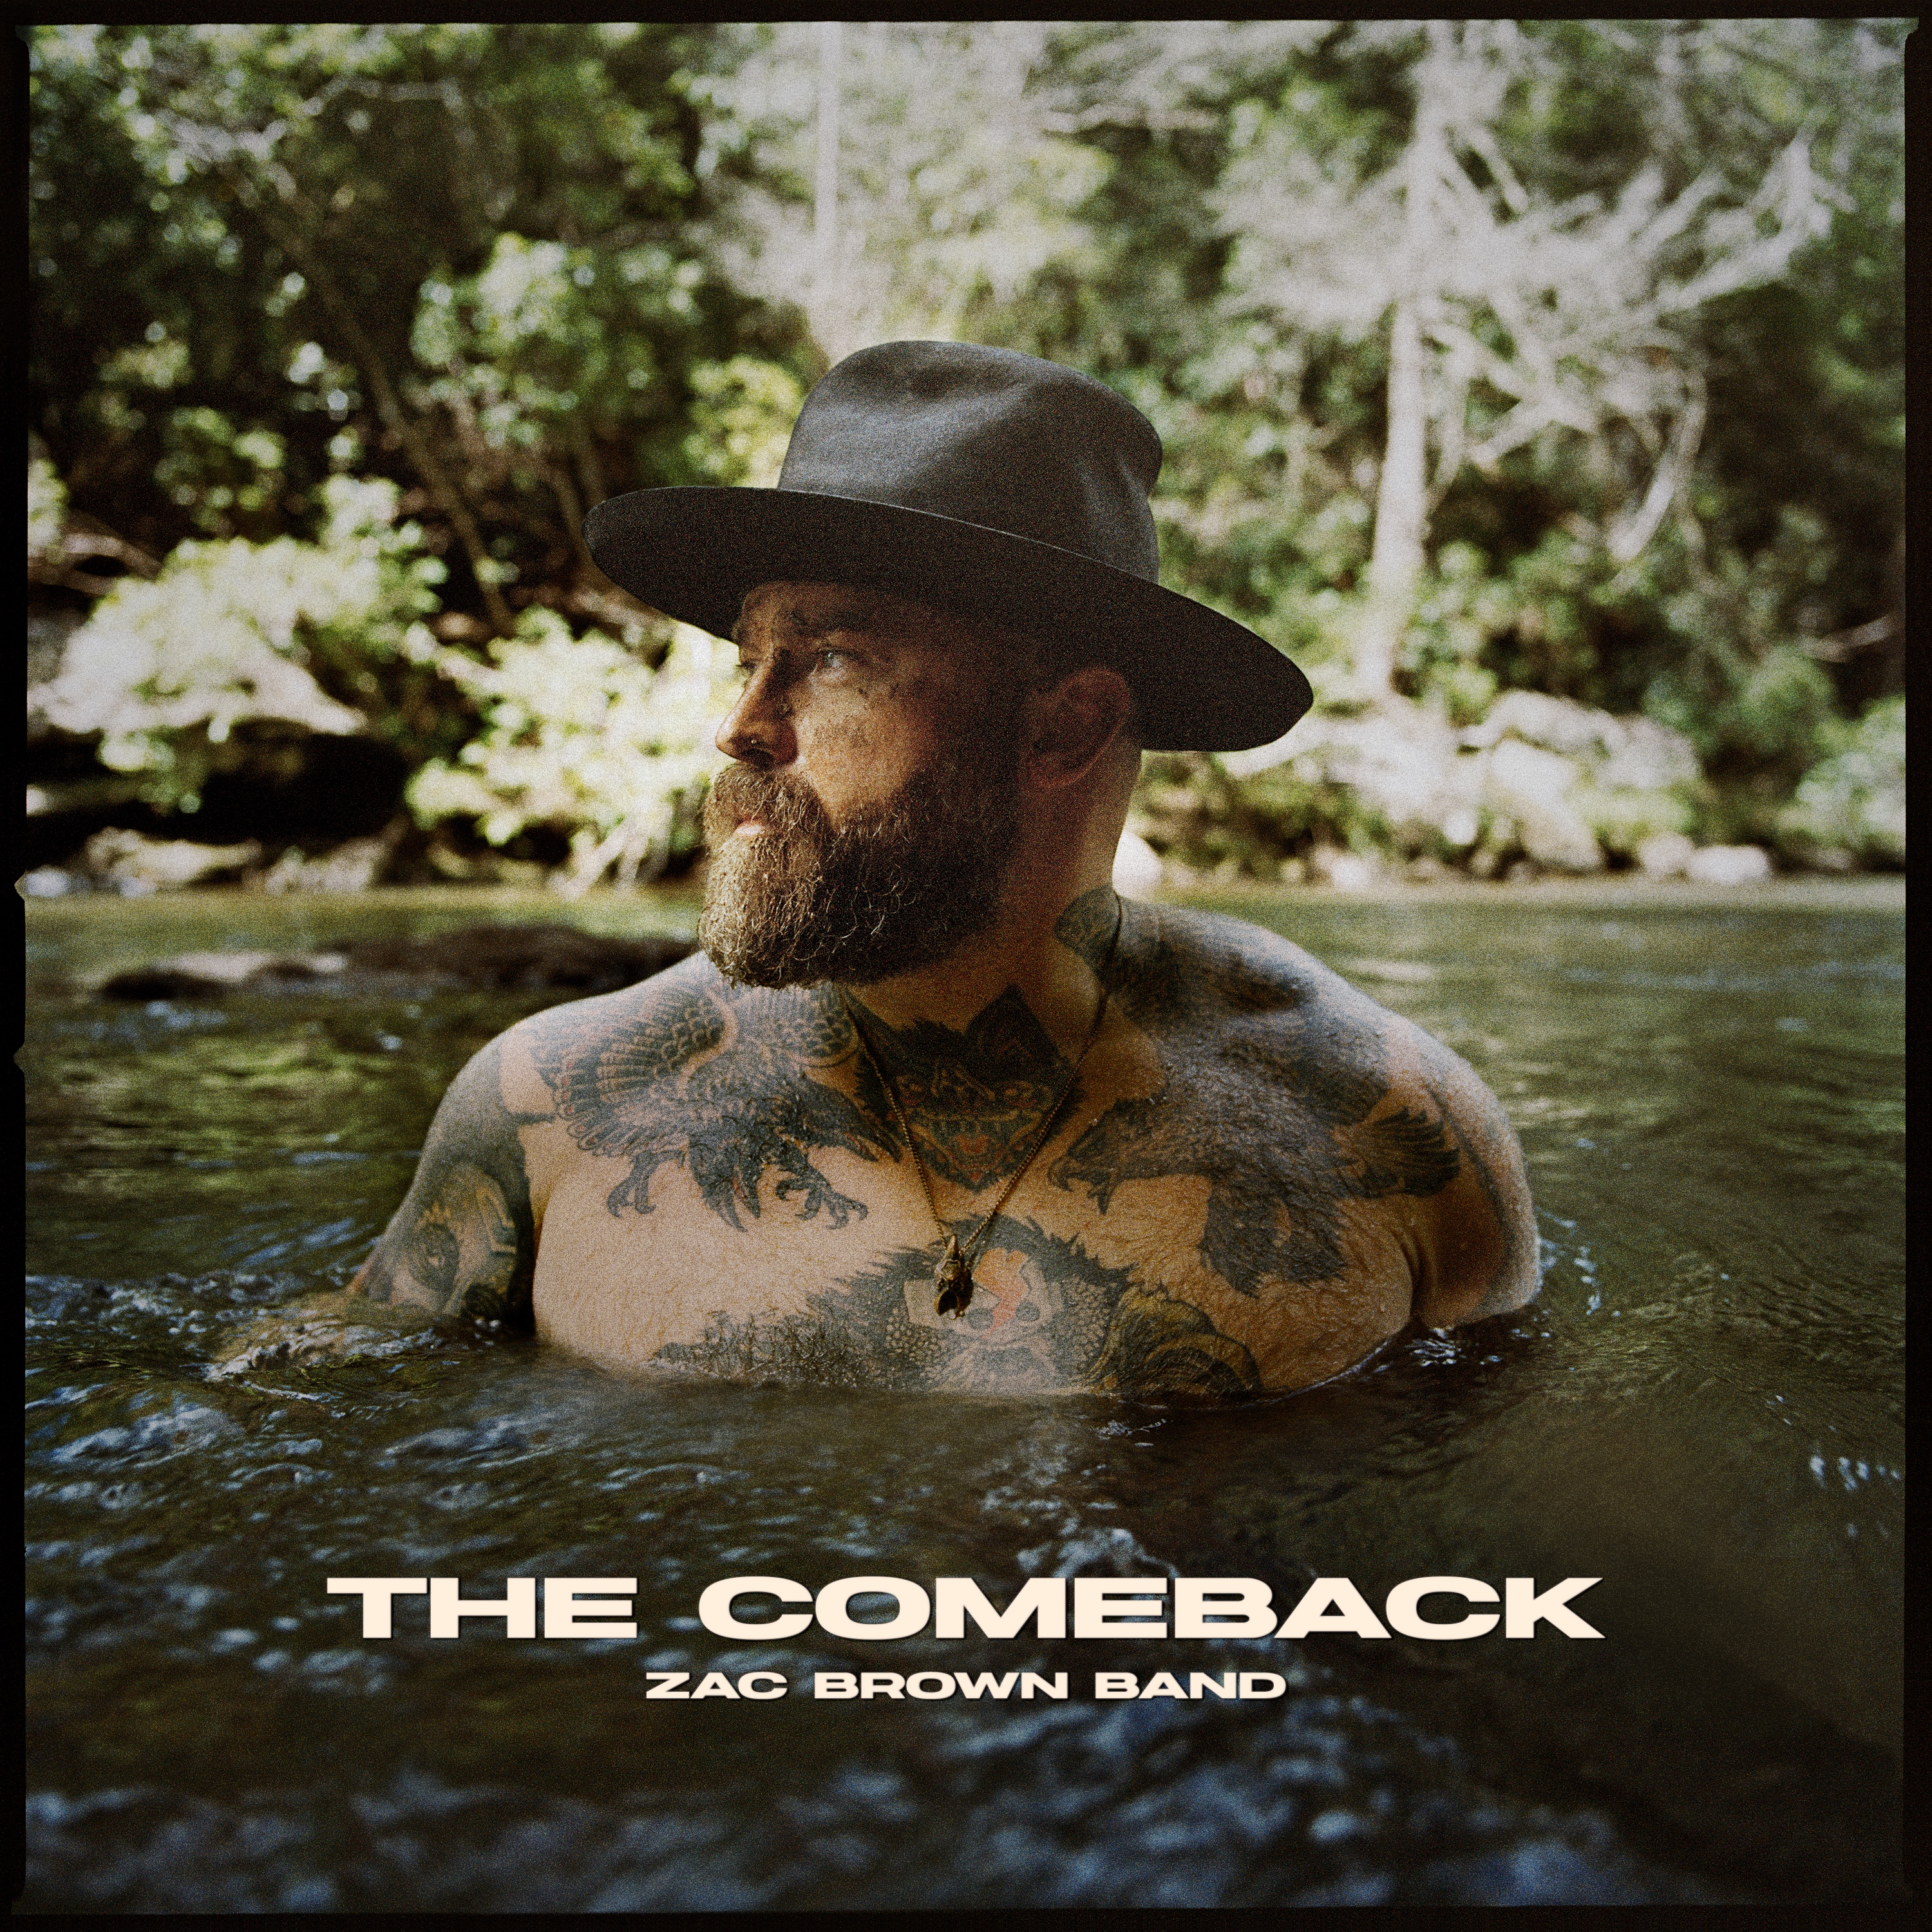 ZAC BROWN BAND ANNOUNCES BRAND NEW ALBUM, THE COMEBACK, AVAILABLE EVERYWHERE OCTOBER 15